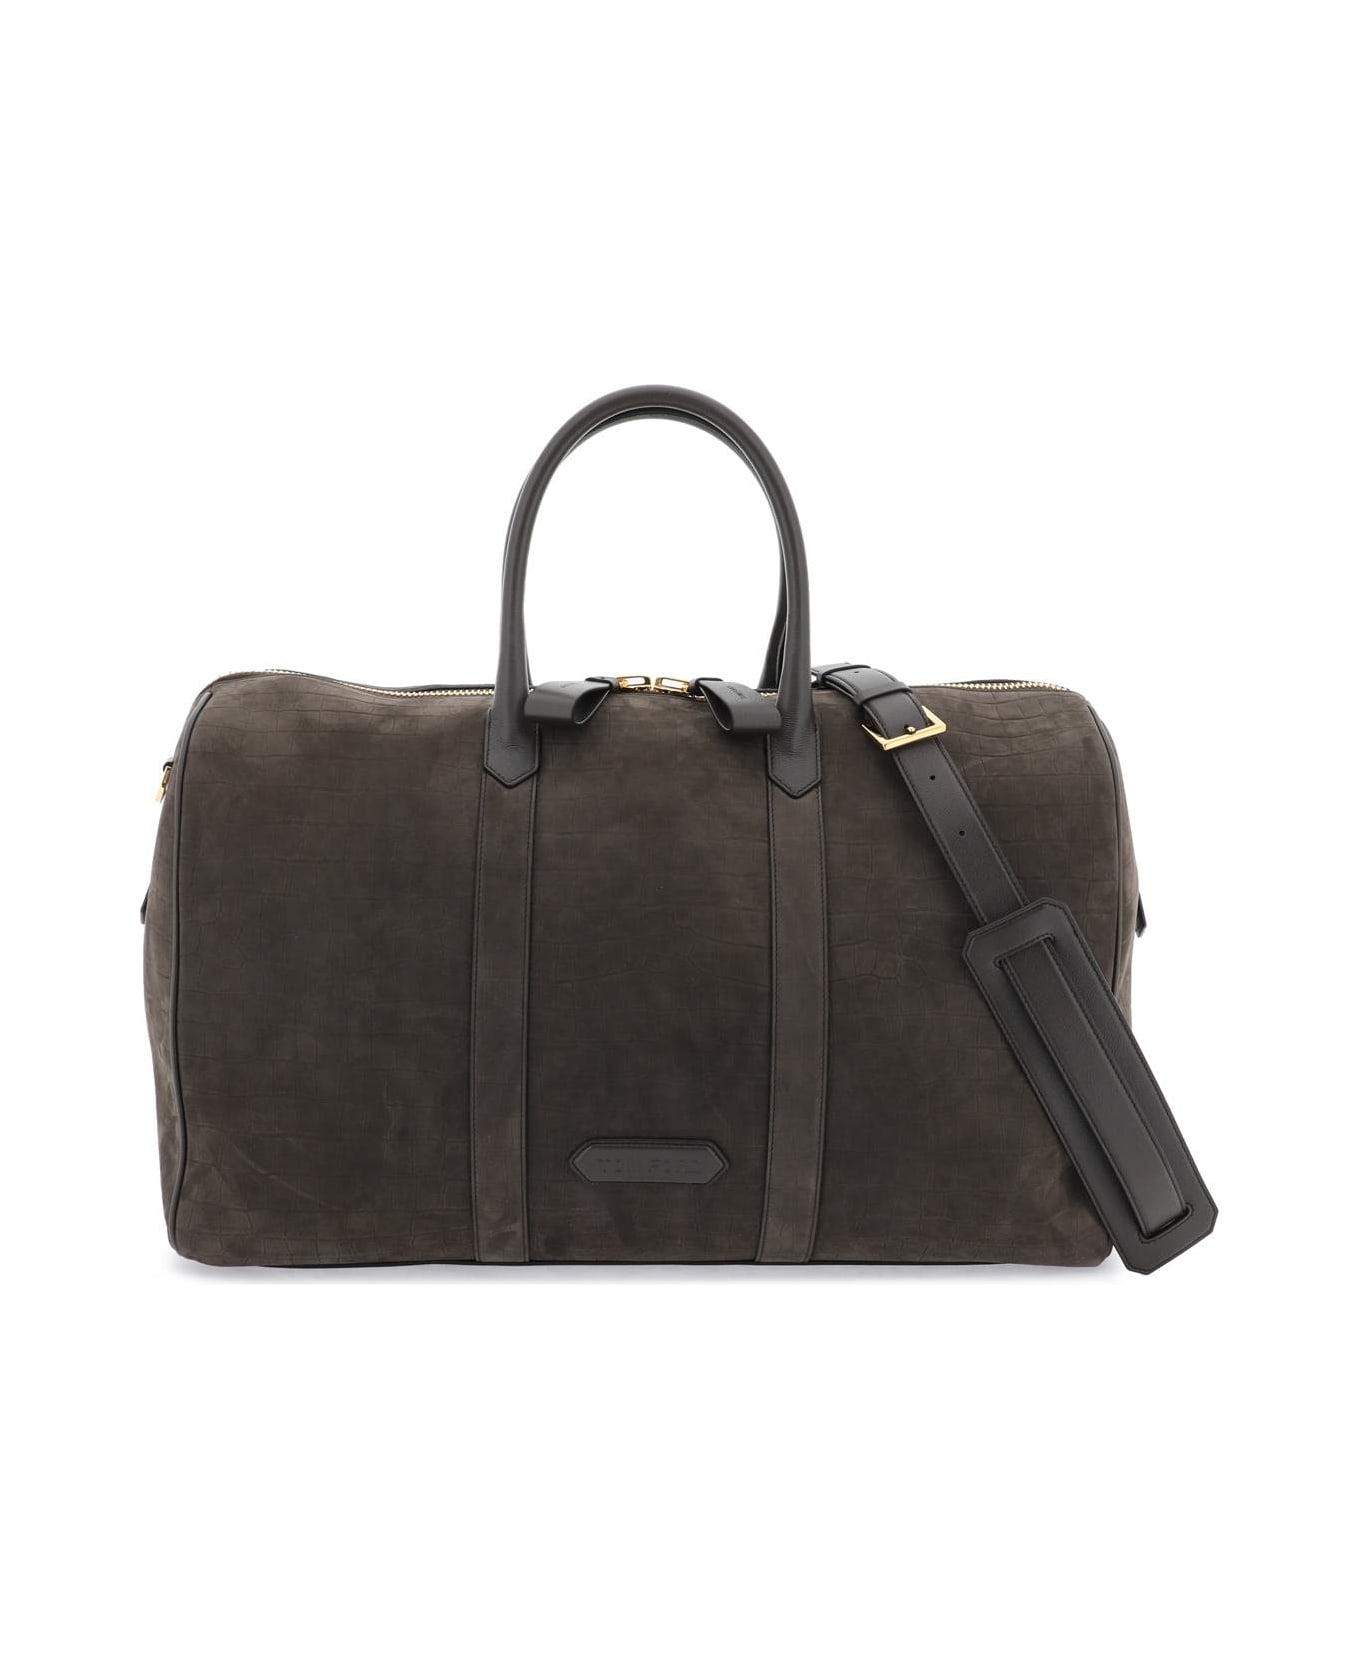 Tom Ford Suede Duffle Bag - FANGO (Brown) トラベルバッグ